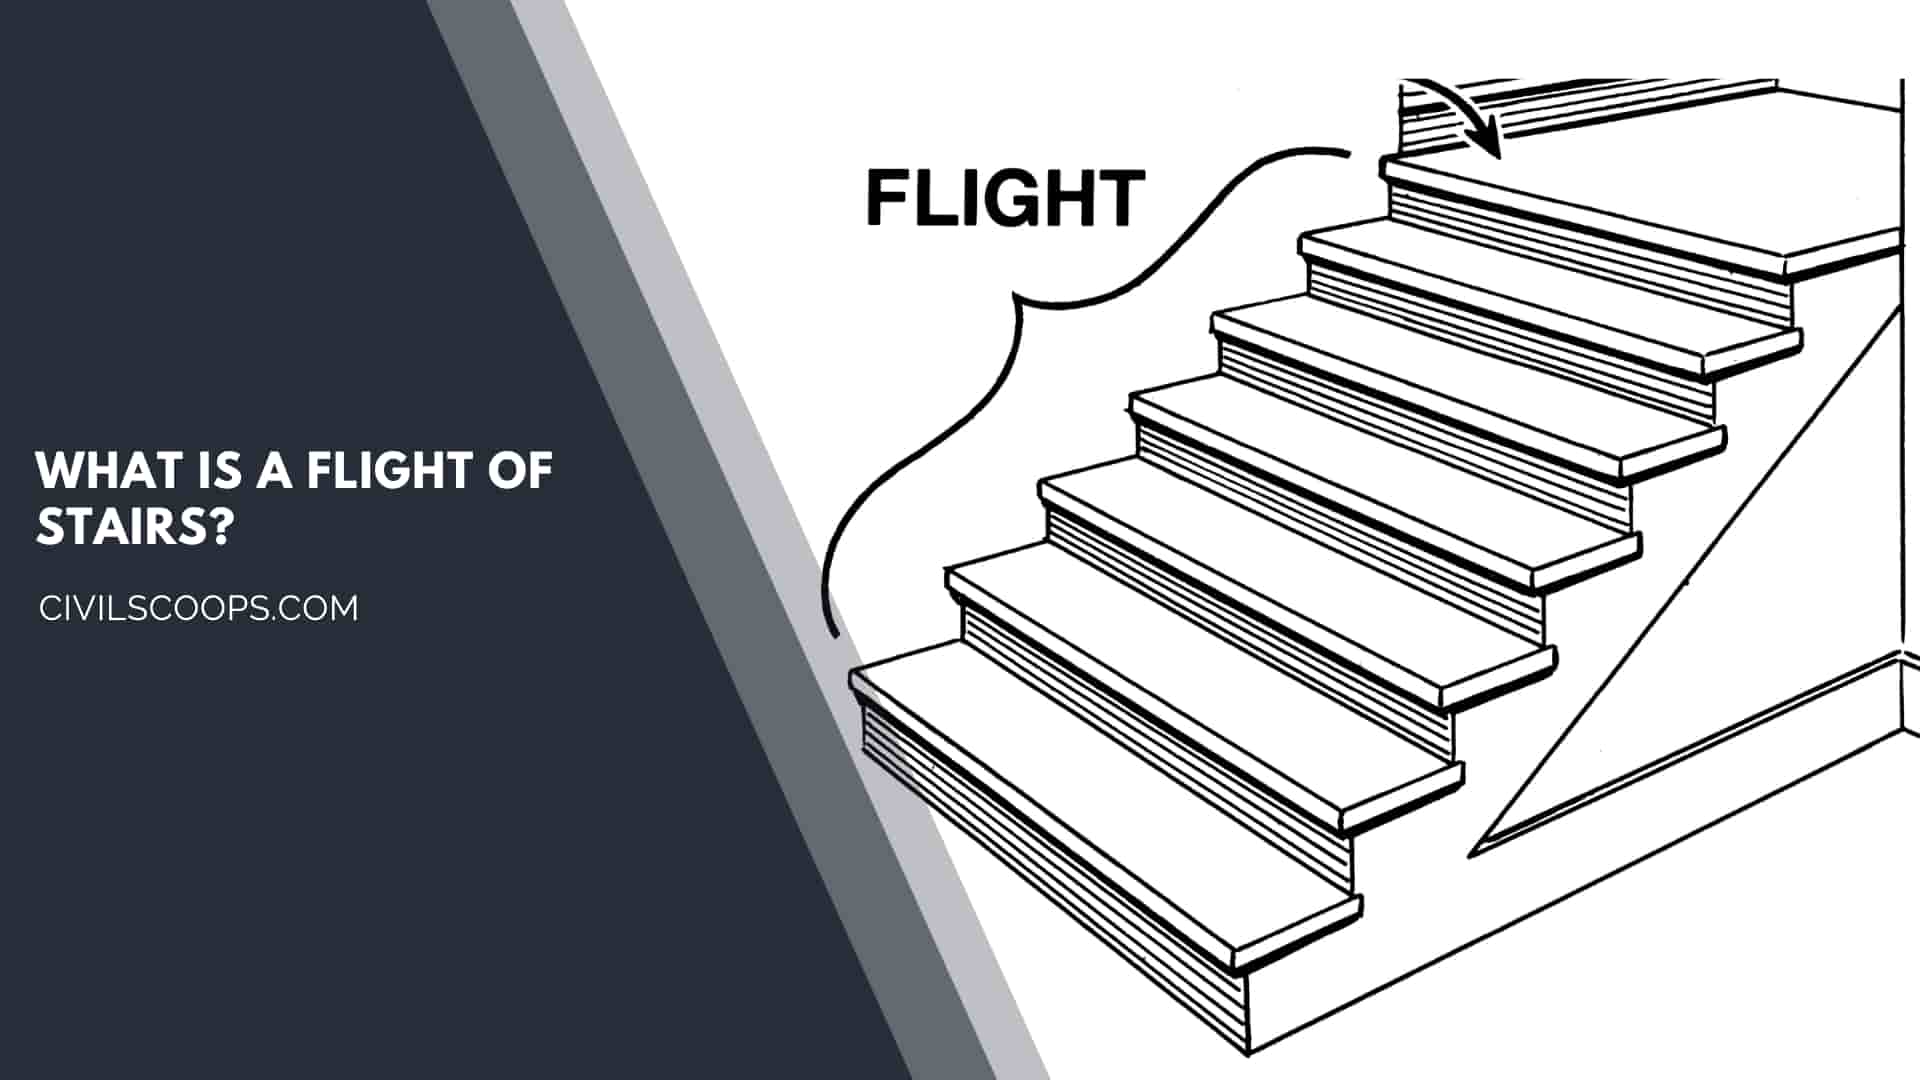 What Is a Flight of Stairs